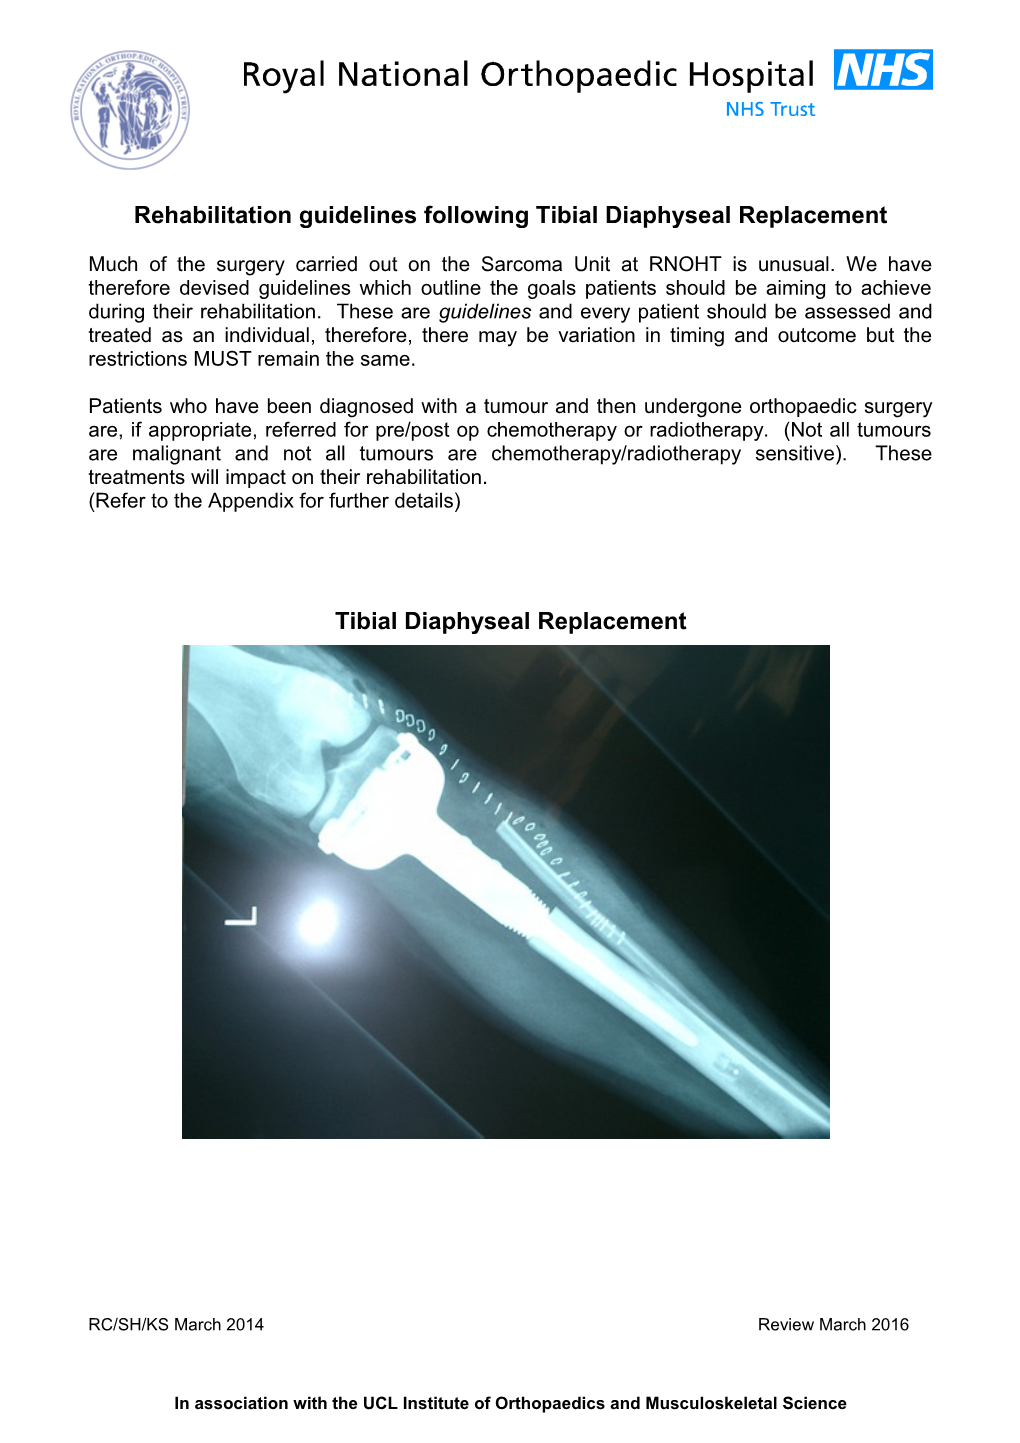 Rehabilitation Guidelines Following Tibial Diaphyseal Replacement